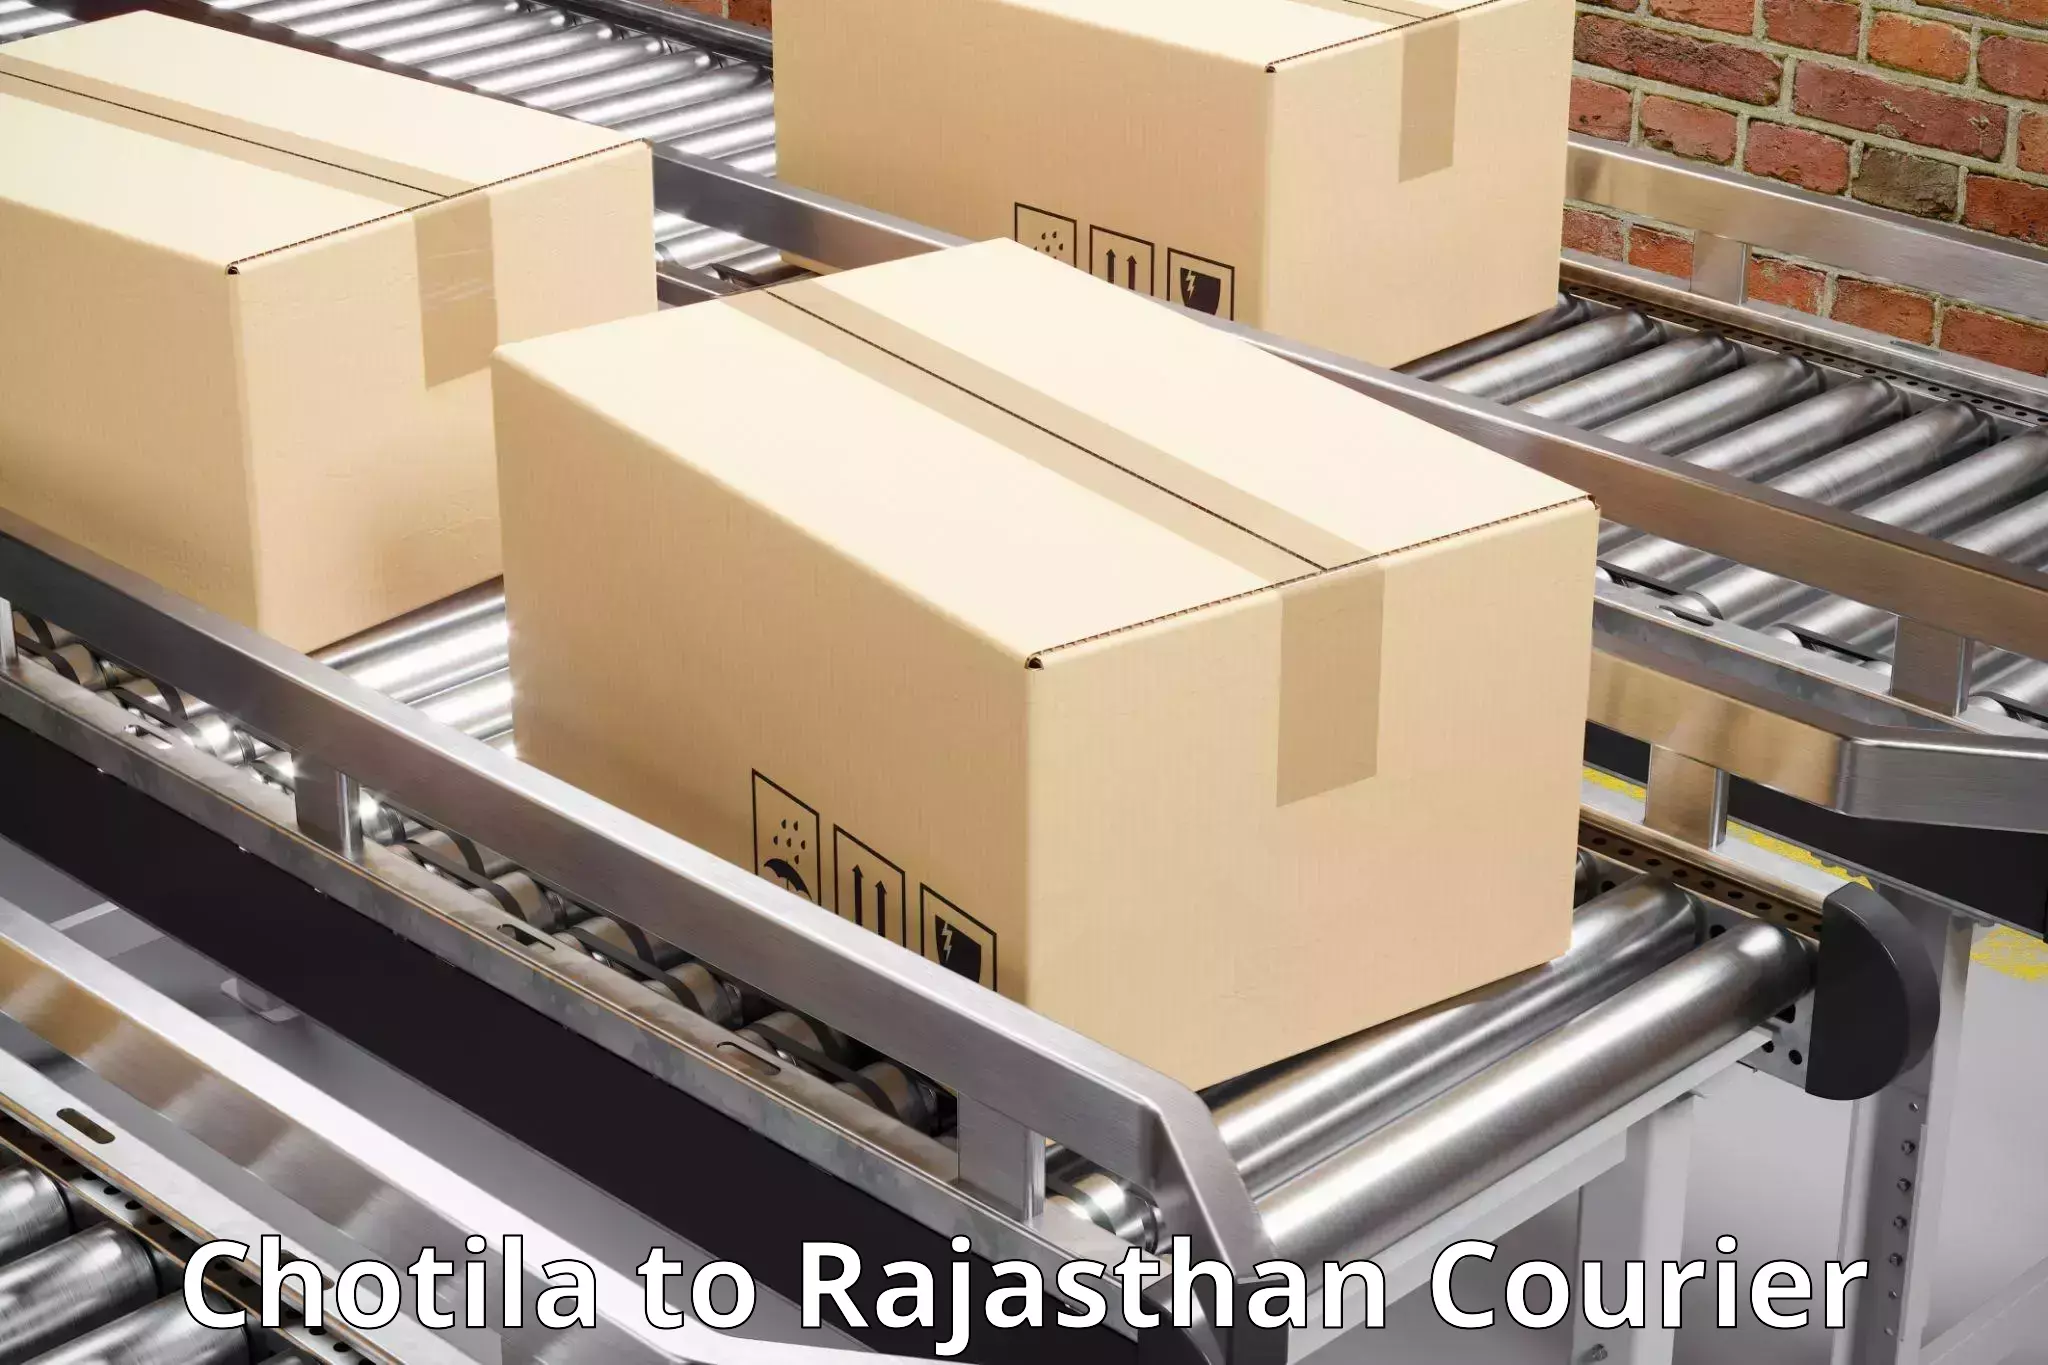 Modern delivery methods Chotila to Rajasthan